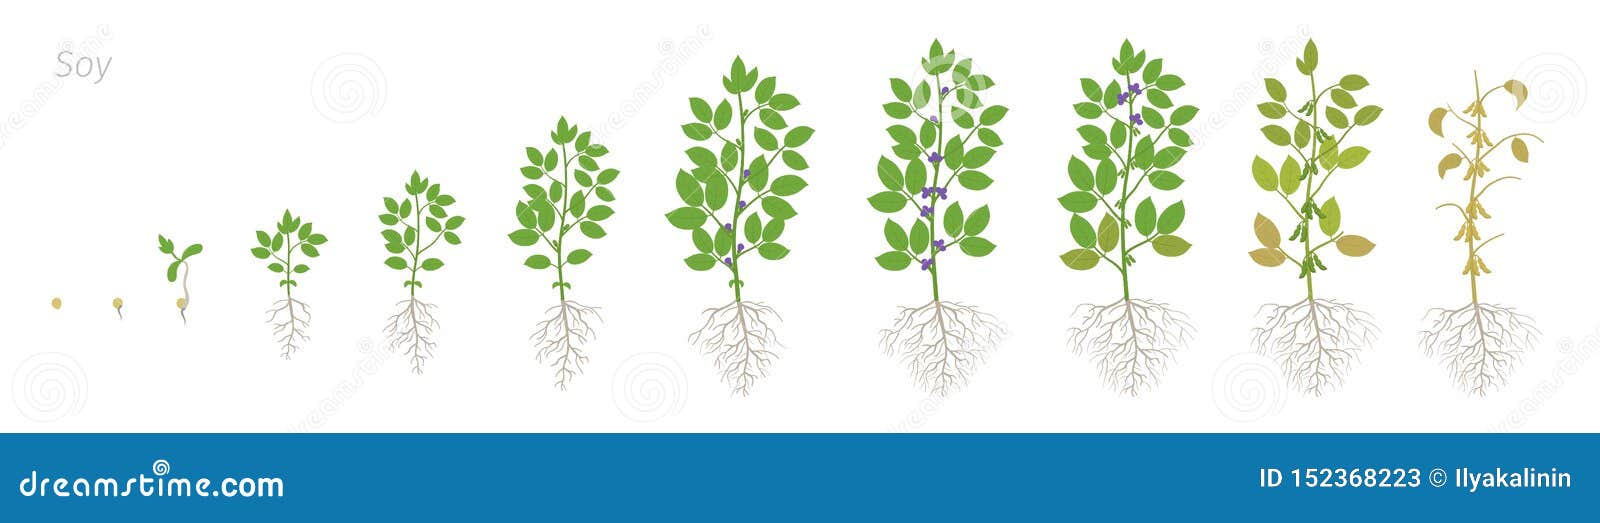 growth stages of soybean plant with roots. soya bean phases set. glycine max. animation progression.